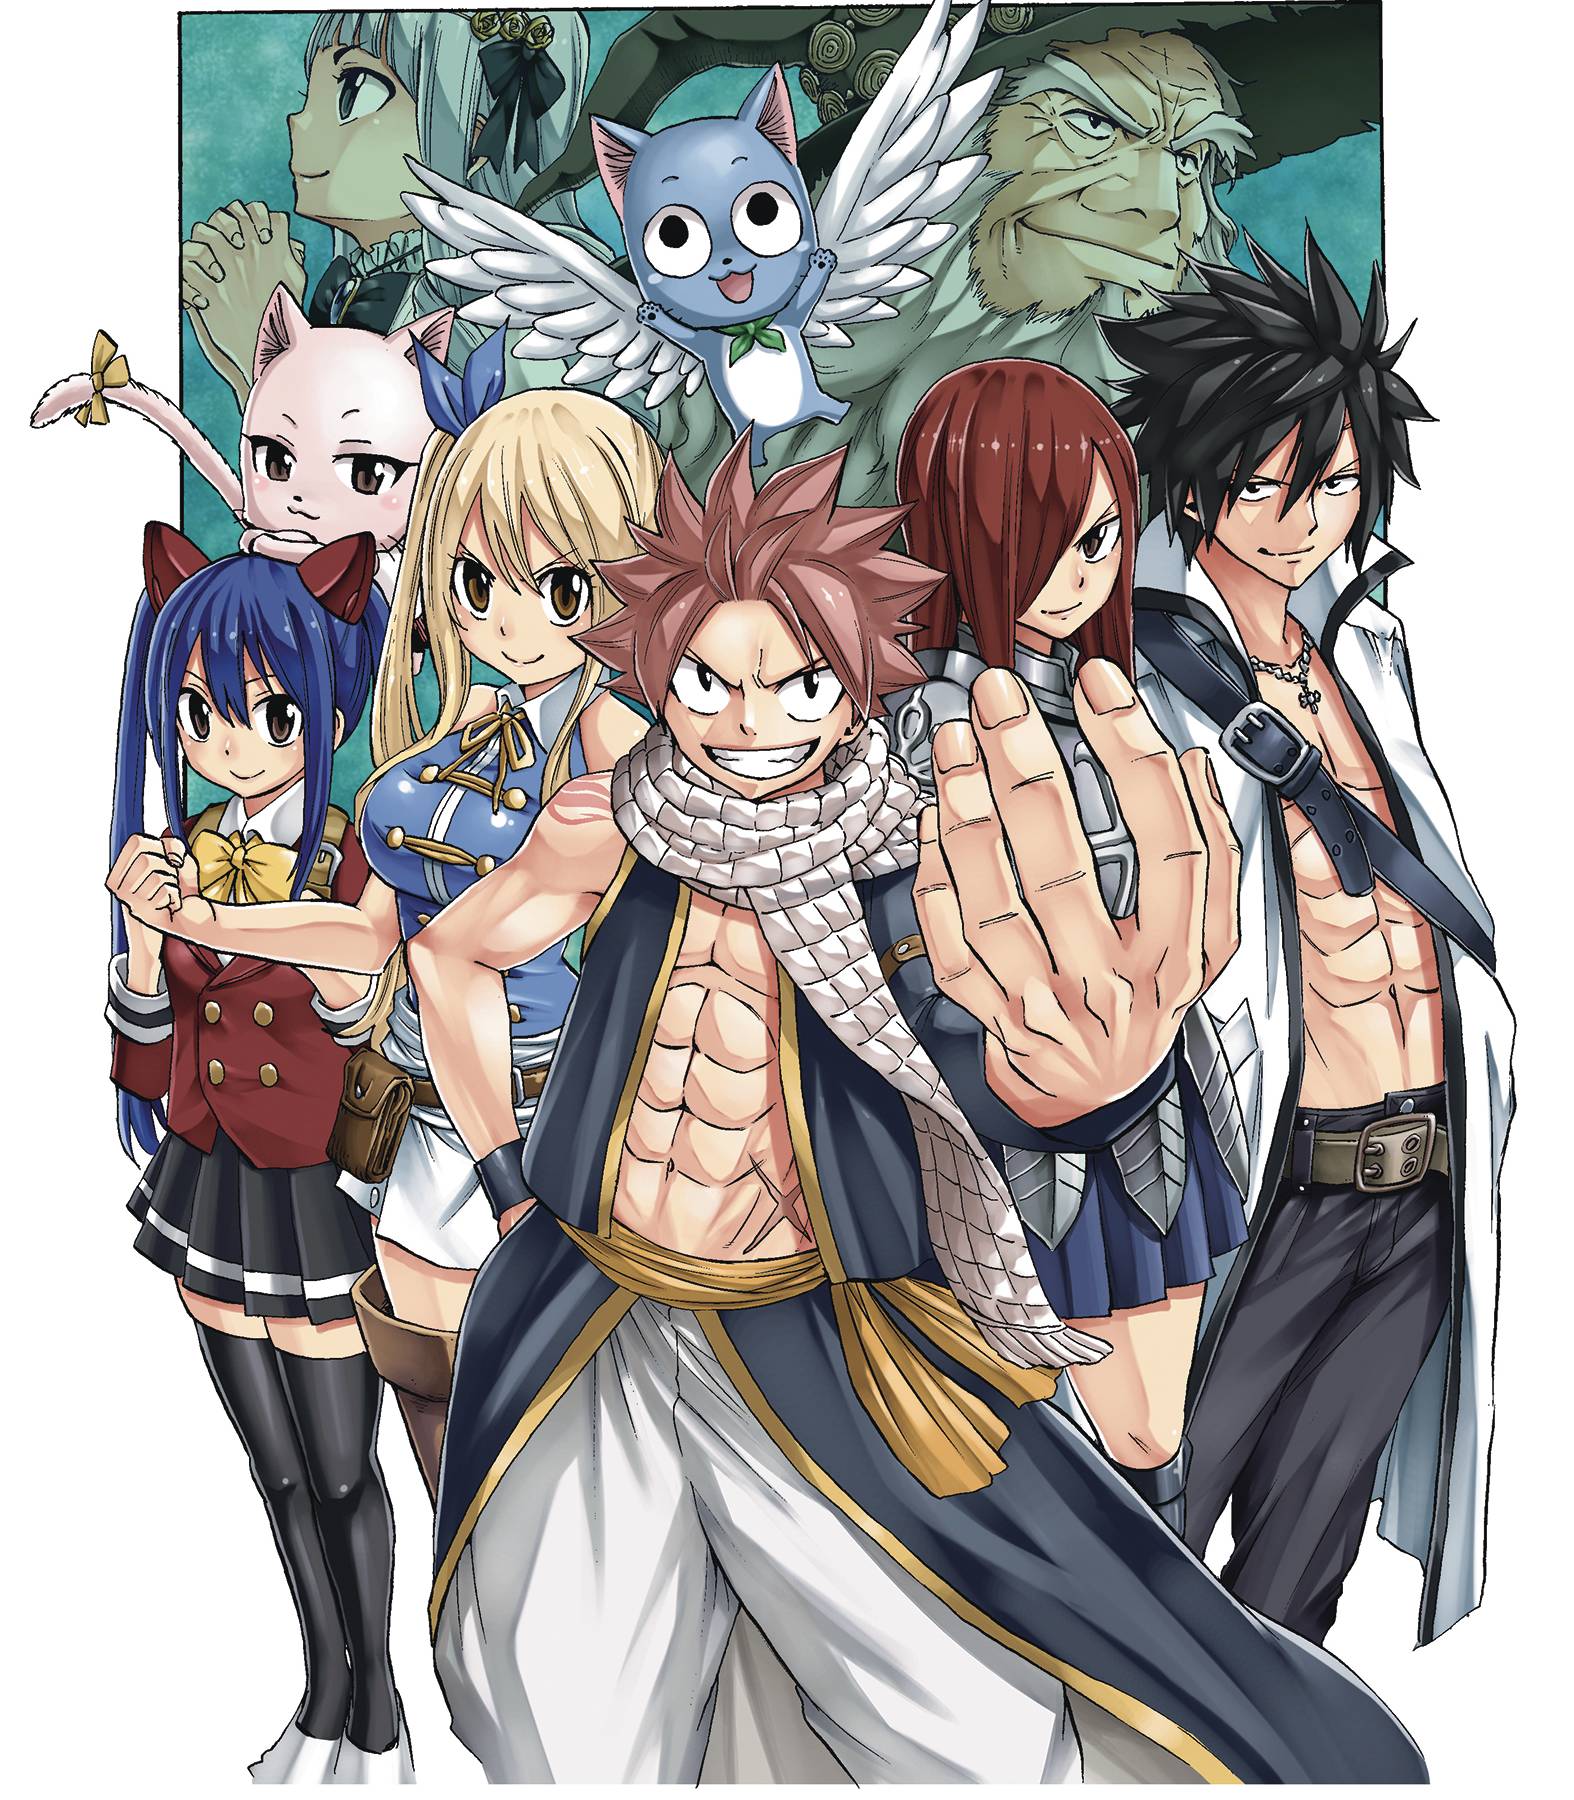 FAIRY TAIL 100 YEARS QUEST GN VOL 08